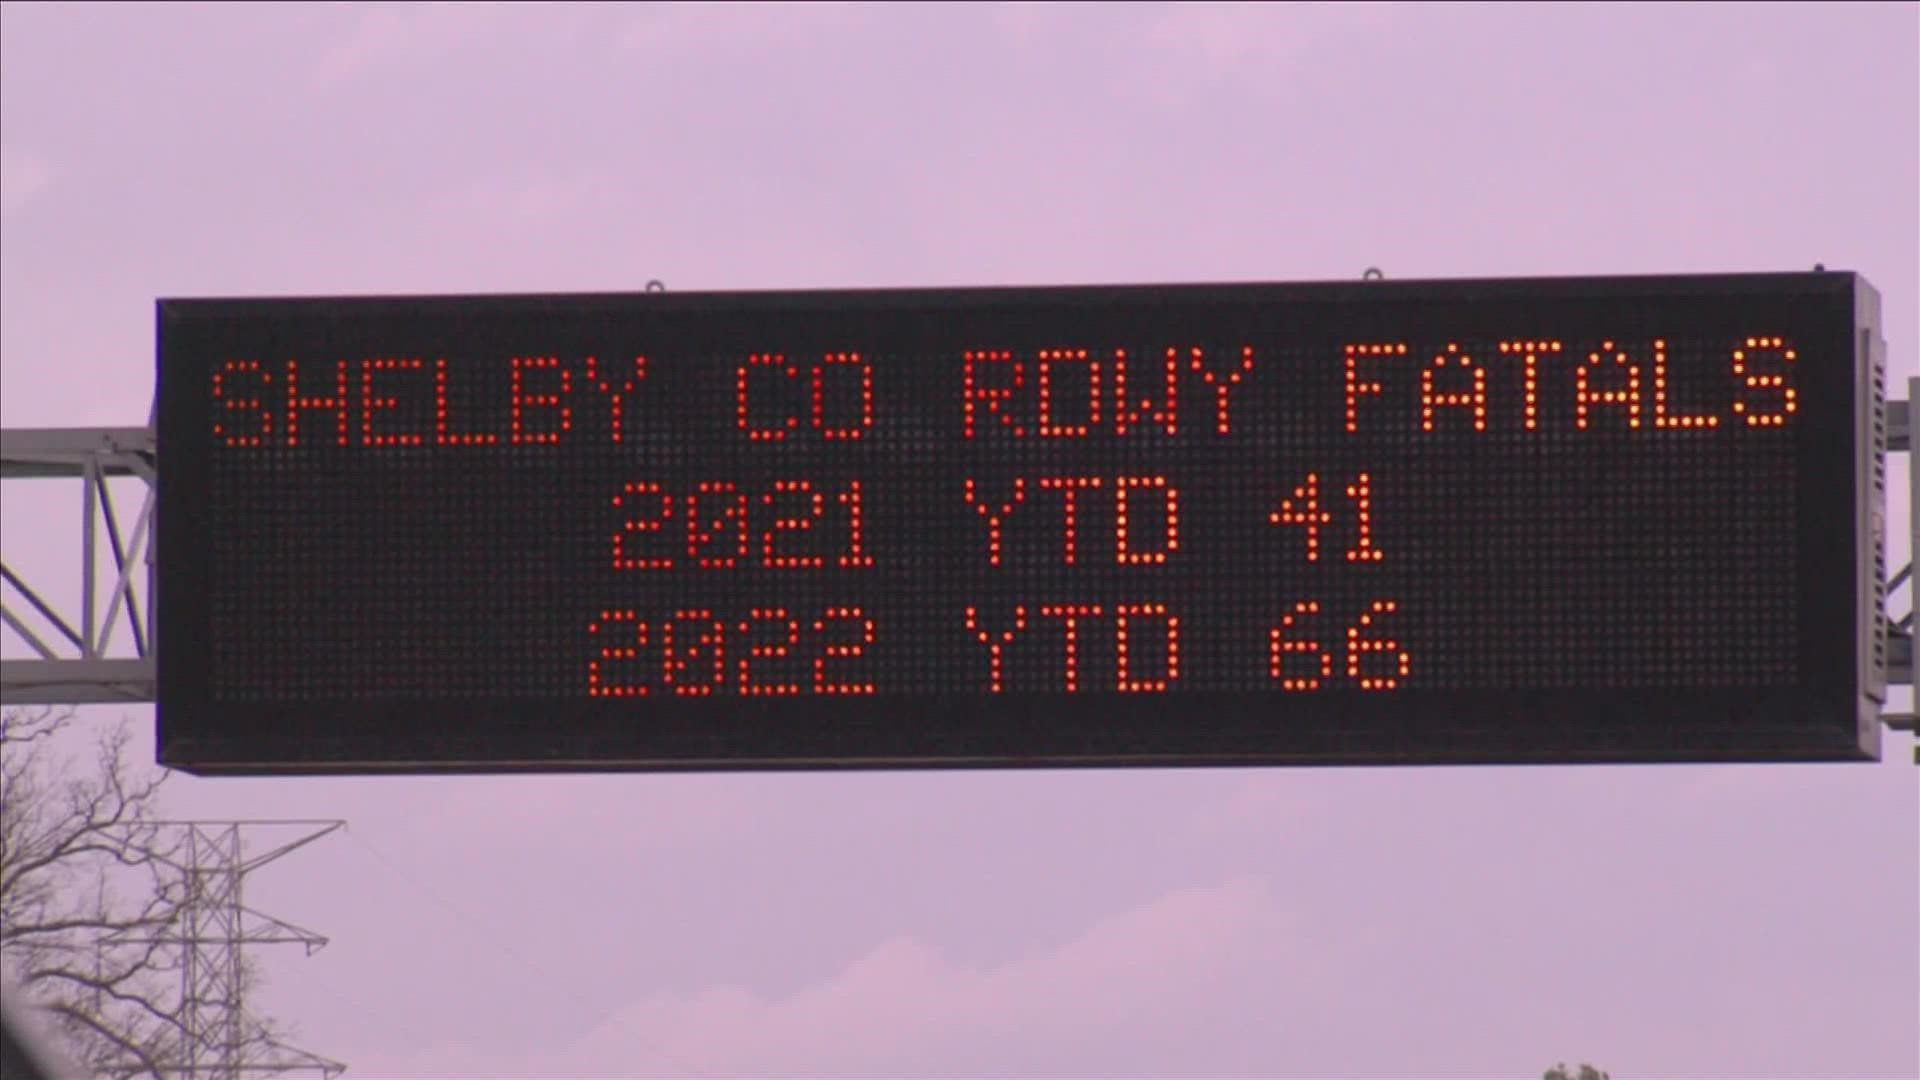 Over the past three months, Shelby County has had more than 8,500 reported crashes. That's almost 100 per day.